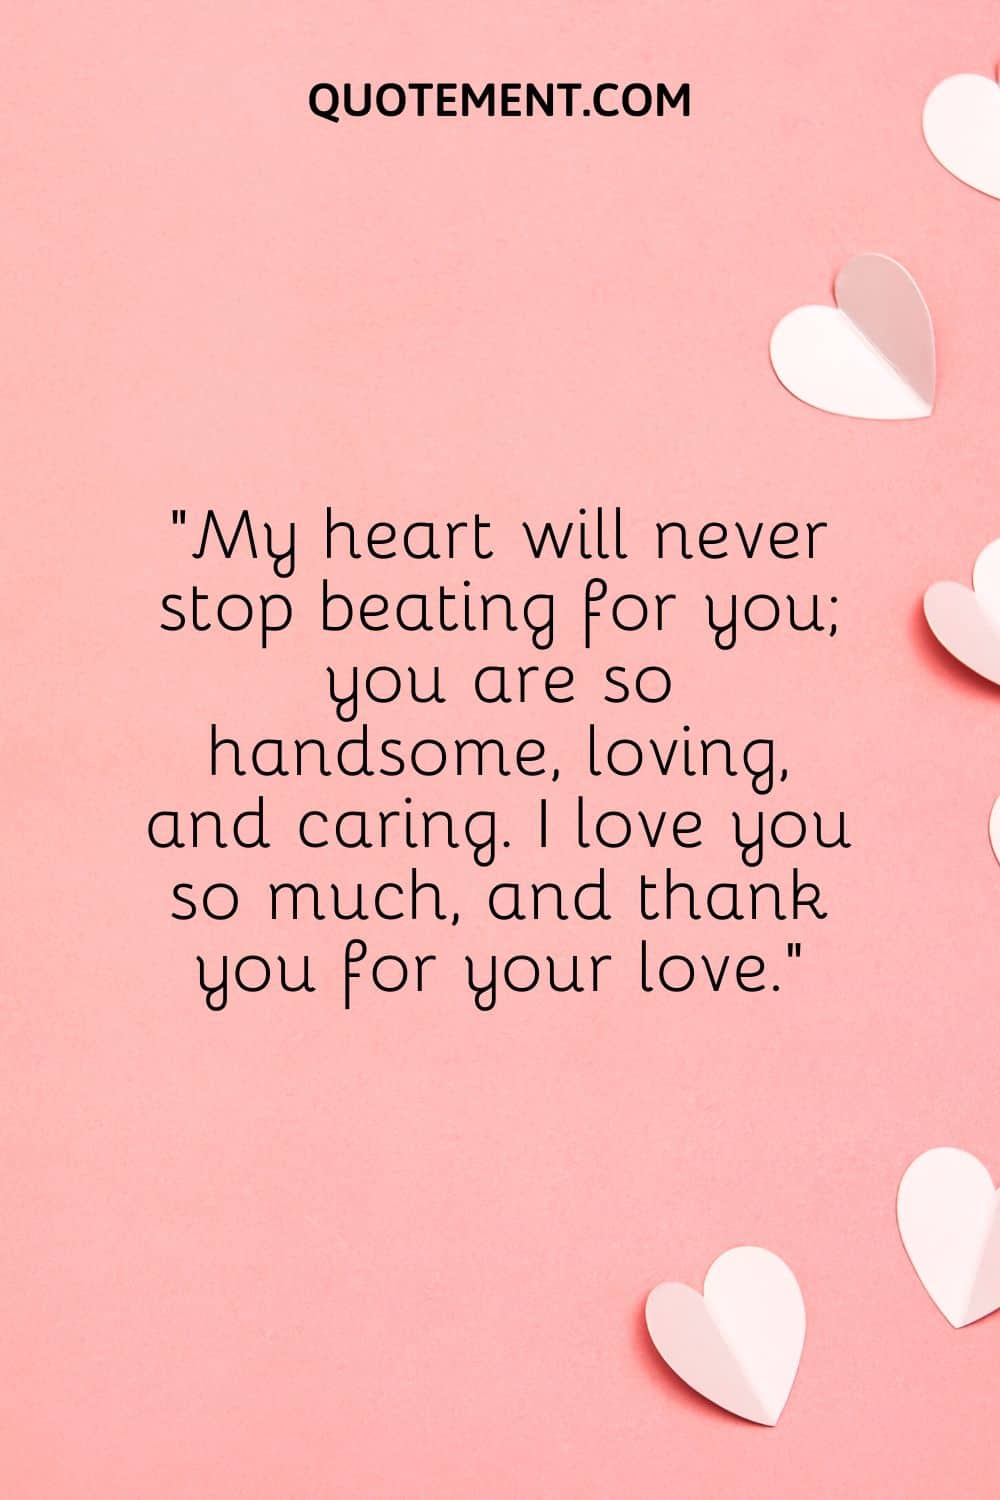 My heart will never stop beating for you